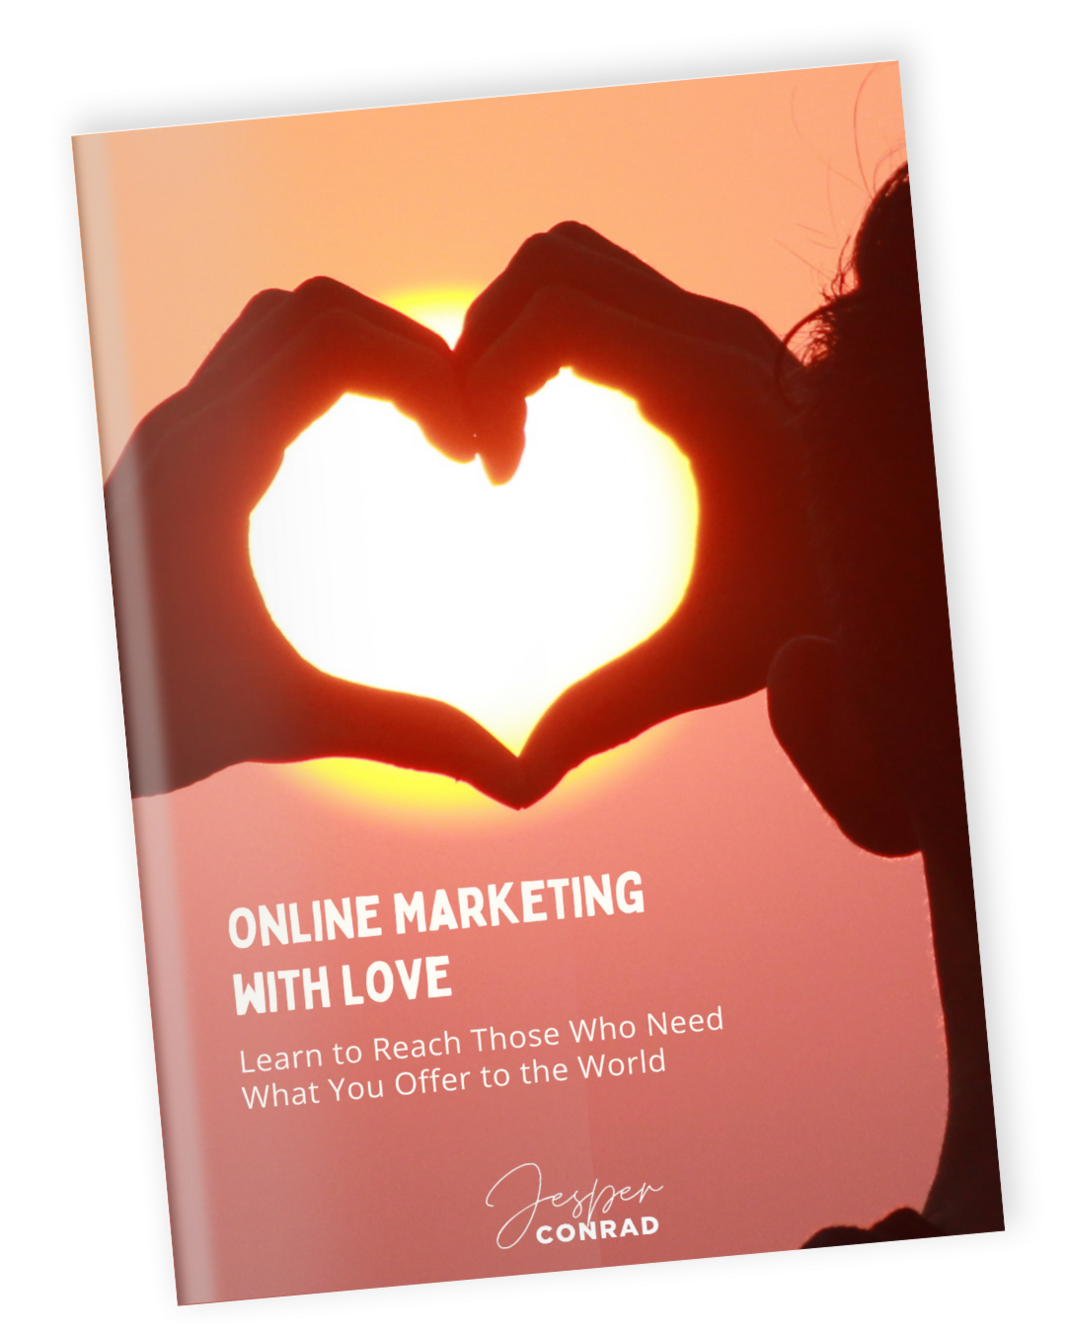 onlinemarkeing with love - ebook mockup